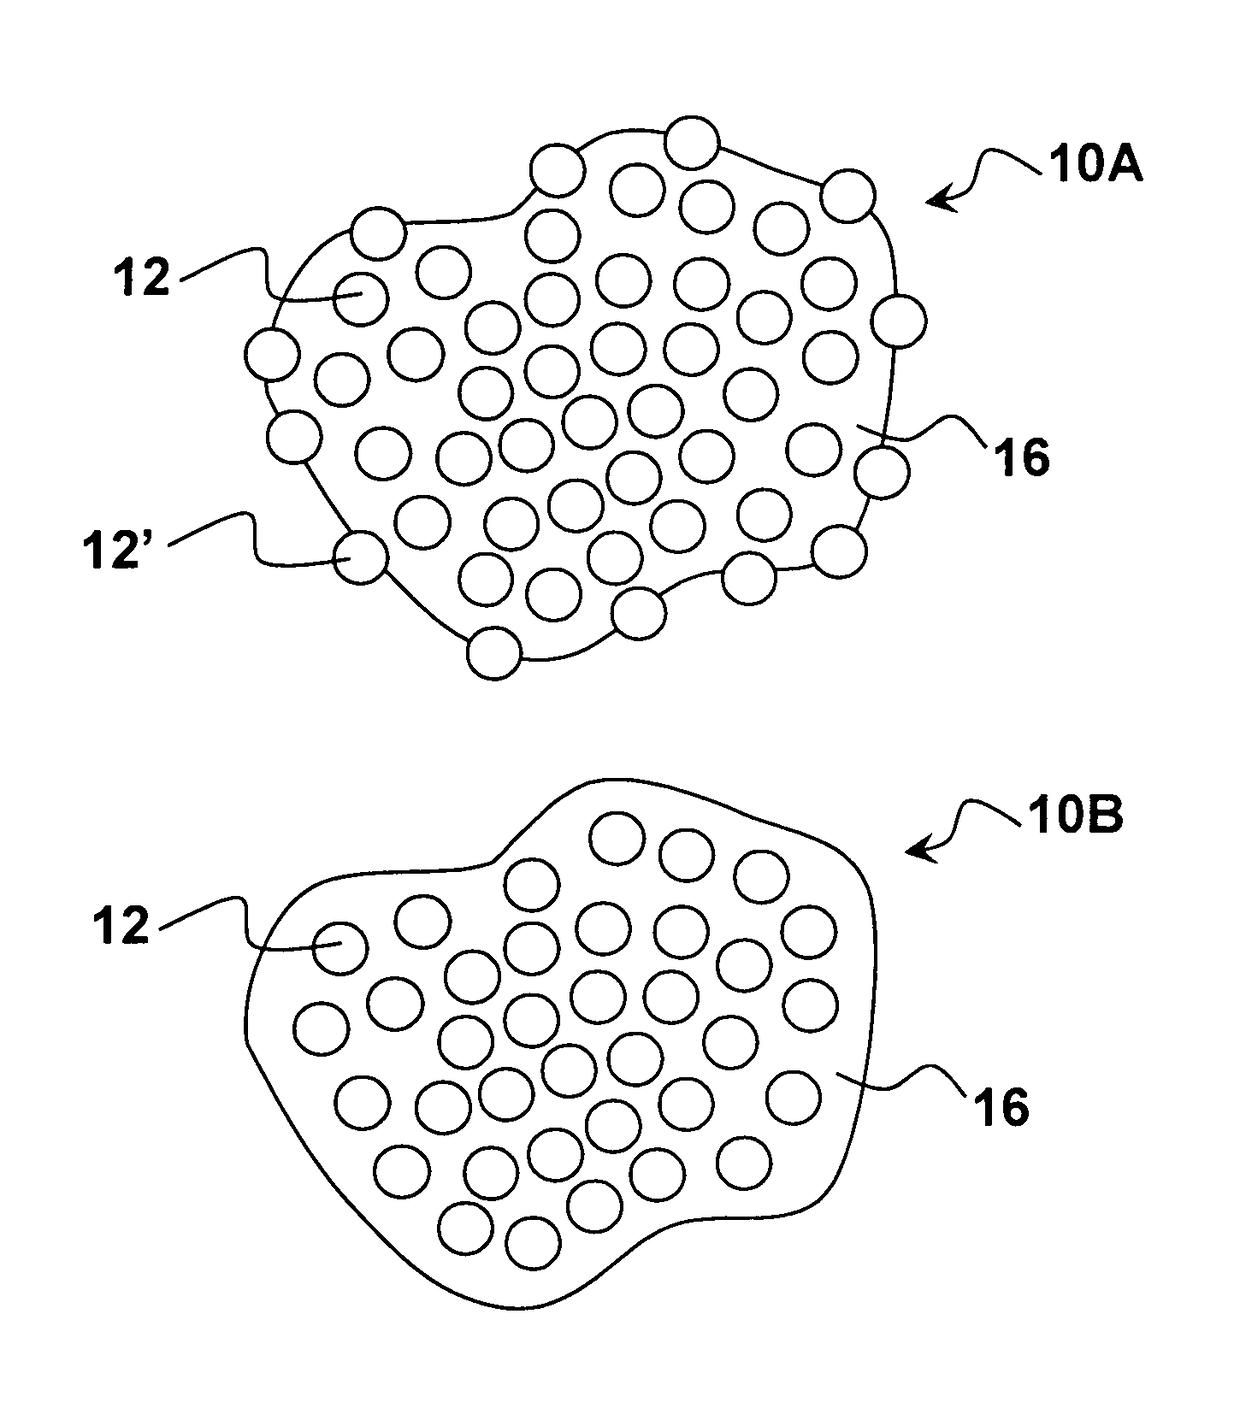 Pharmaceutical compositions comprising nanoparticles and a resuspending material